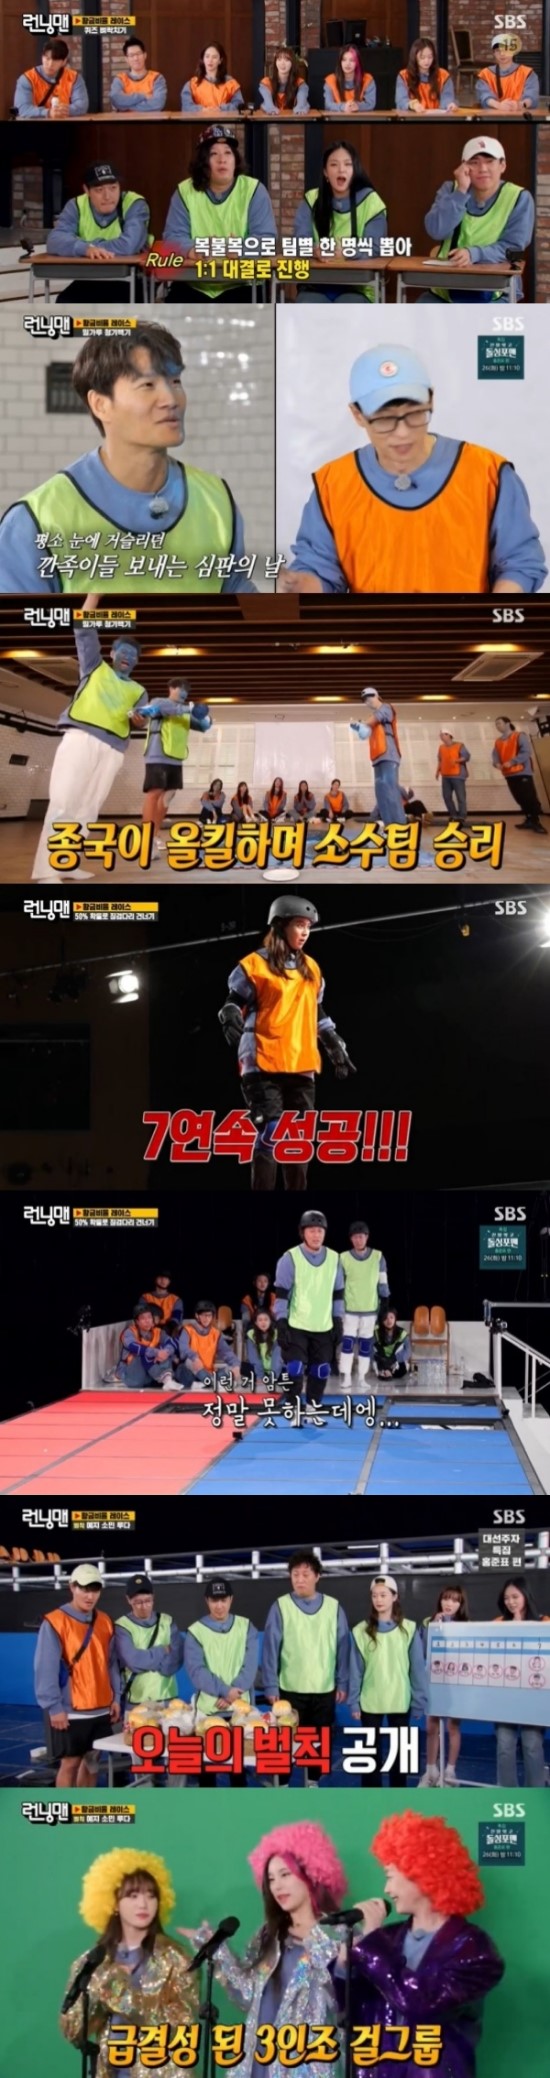 Running Man surpassed the highest audience rating of 10% per minute and kept the number one audience rating in the same time zone.Running Man, which aired on the last 24 Days, ranked first in entertainment in the same time zone with an average audience rating of 5.9% (hereinafter based on Nielsen Korea Seoul Capital Area, household), and the highest audience rating per minute jumped to 10.3%.The 2049 ratings, the main indicator and target indicator of advertisers, also ranked first in the same time zone with 3.2% (hereinafter based on Nielsen Korea Seoul Capital Area).The broadcast was decorated with Golden Ratio Race, and guest Min-ji, singer Bibi, ITZY Yezi and WJSN Luda, representing the MZ generation, joined together.The members cheered all the guest appearances, but they laughed at the appearance of Min-ji.Golden Ratio Race was given a number by one captain while conducting the keyword mission every round, and PD decided to draw a number to decide the team.The first showdown was a quiz showdown: With Kim Jong-kook becoming the captain, Yang Se-chan, Haha, MC Min-ji and Bibi became the emptied minority teams.However, the quiz showdown was unexpected and a minority team won.The second race was teamed with Kim Jong-kook, with Ji Suk-jin being selected as the captain and PD picking up two.The showdown of Somewhere Sick Hearing White Age unfolded and the appearance of absolute strongman Kim Jong-kook left many teams in fear.This game, which had to be punched with flour buried and ordered by MC, was a game in favor of Kim Jong-kook, who was ahead of power.Among them, Kim Jong-kook and Min-jis confrontation gave a big smile.Kim Jong-kook laughed, saying, It fits well even if you swing it, it has a wide face area. Min-ji said, It hurts a little.This is a funny game, he said, and laughed.Eventually, Min-ji didnt hit a single and the Ji Suk-jin team won.The final race had to cross the stepping stones only with a tentacle; members complained of fear in the extreme situation where they had to Choices the broken styrofoam and hard wooden-plate legs at 1/2 odds.Song Ji-hyo, the King of the Speech, was also nervous, but he overcame a huge probability battle and threw up the chorus of seven consecutive wooden legs.Yang Se-chan stepped up after the same team Bibi was eliminated immediately.Yang Se-chan said, I will go to Kong in Gangshi mode for laughter, and he laughed more loudly when his legs broke into his unexpected knife.The scene was the highest audience rating of 10.3% per minute, accounting for the best one minute.Thanks to Song Ji-hyos performance, Kim Jong-kooks team easily crossed the bridge, and opponents Ji Suk-jin, Min-ji, Luda, Jeon So-min, Haha and Yezi did not advance more than a step.The final result was Kim Jong-kook first, Song Ji-hyo second, and Jeon So-min, Luda and Yezi received penalties.The three penalties danced for a minute to the Min-ji, ITZY and WJSN songs with a cute makeup.Photo: SBS Running Man